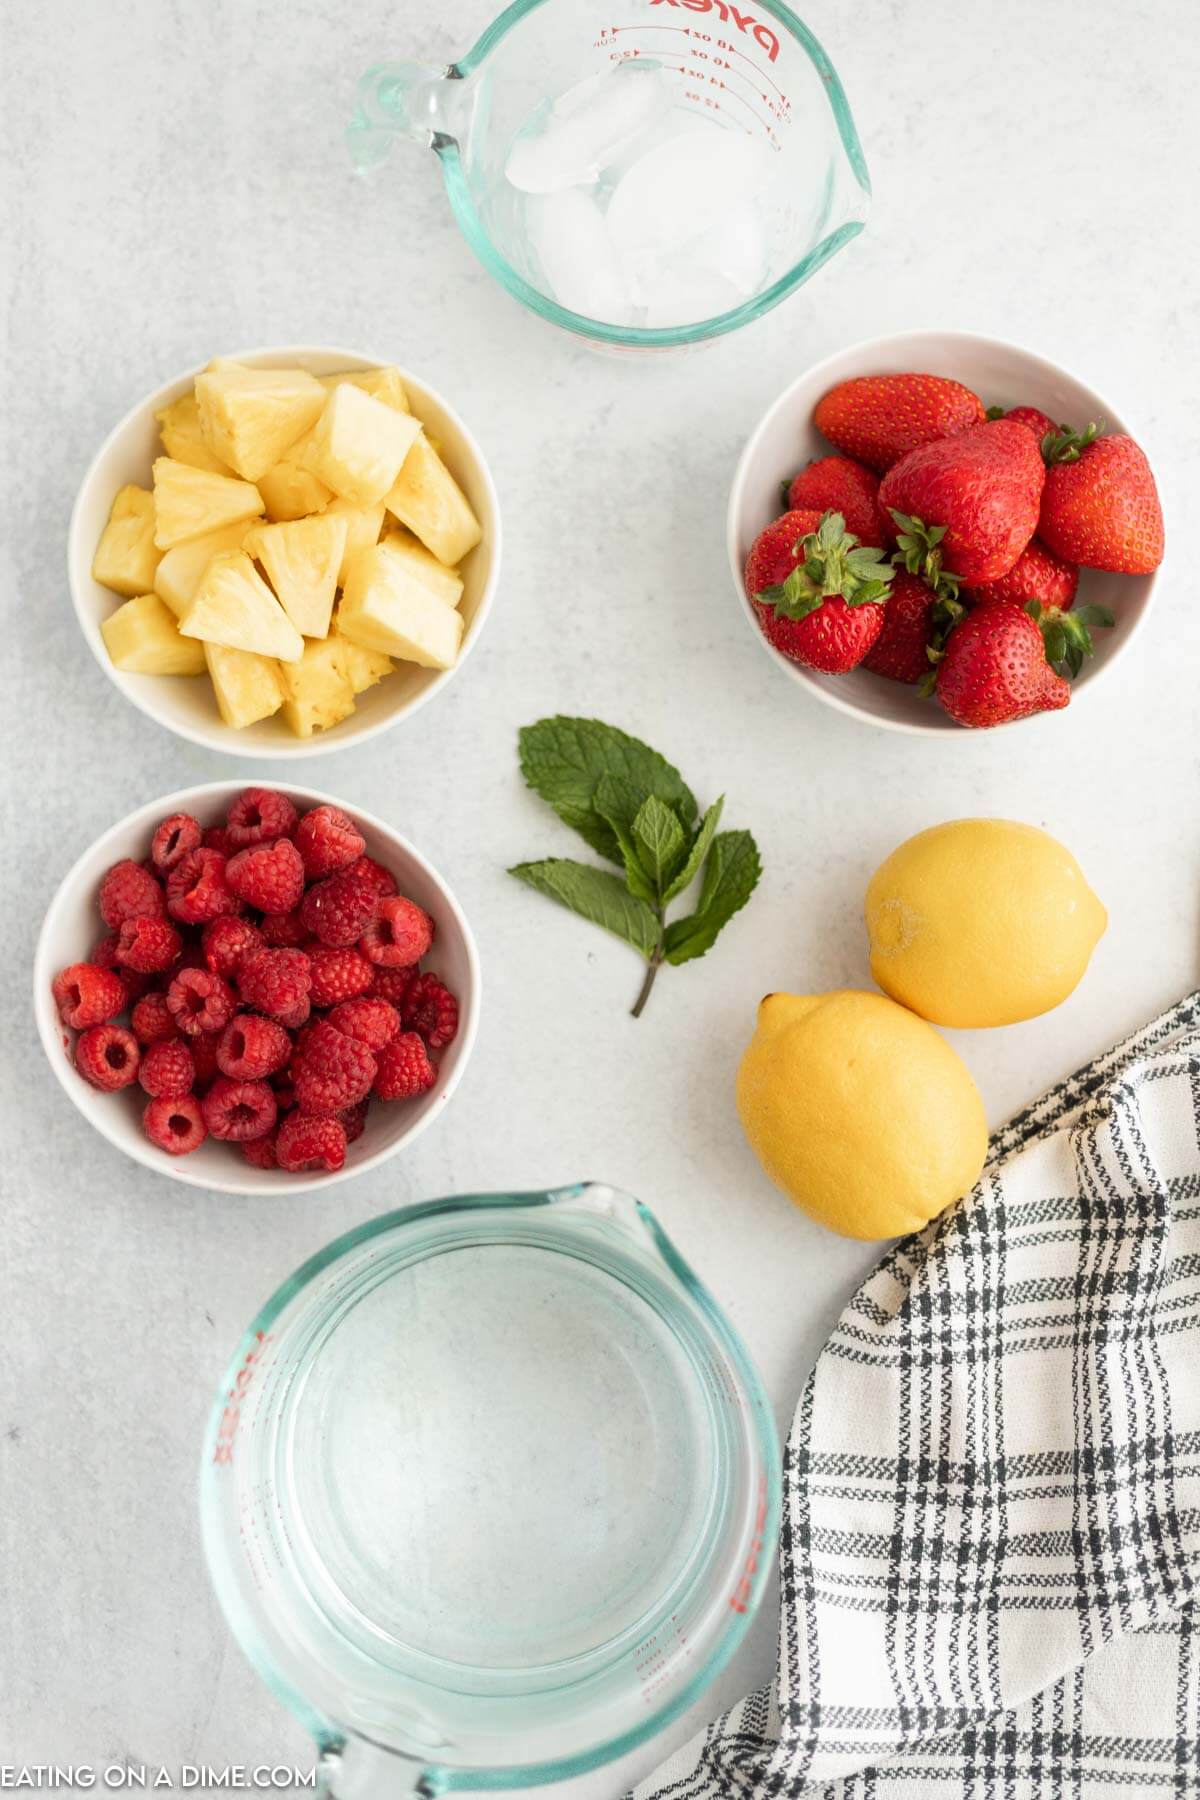 Best Fruit Infused Water Recipes • Veggie Society